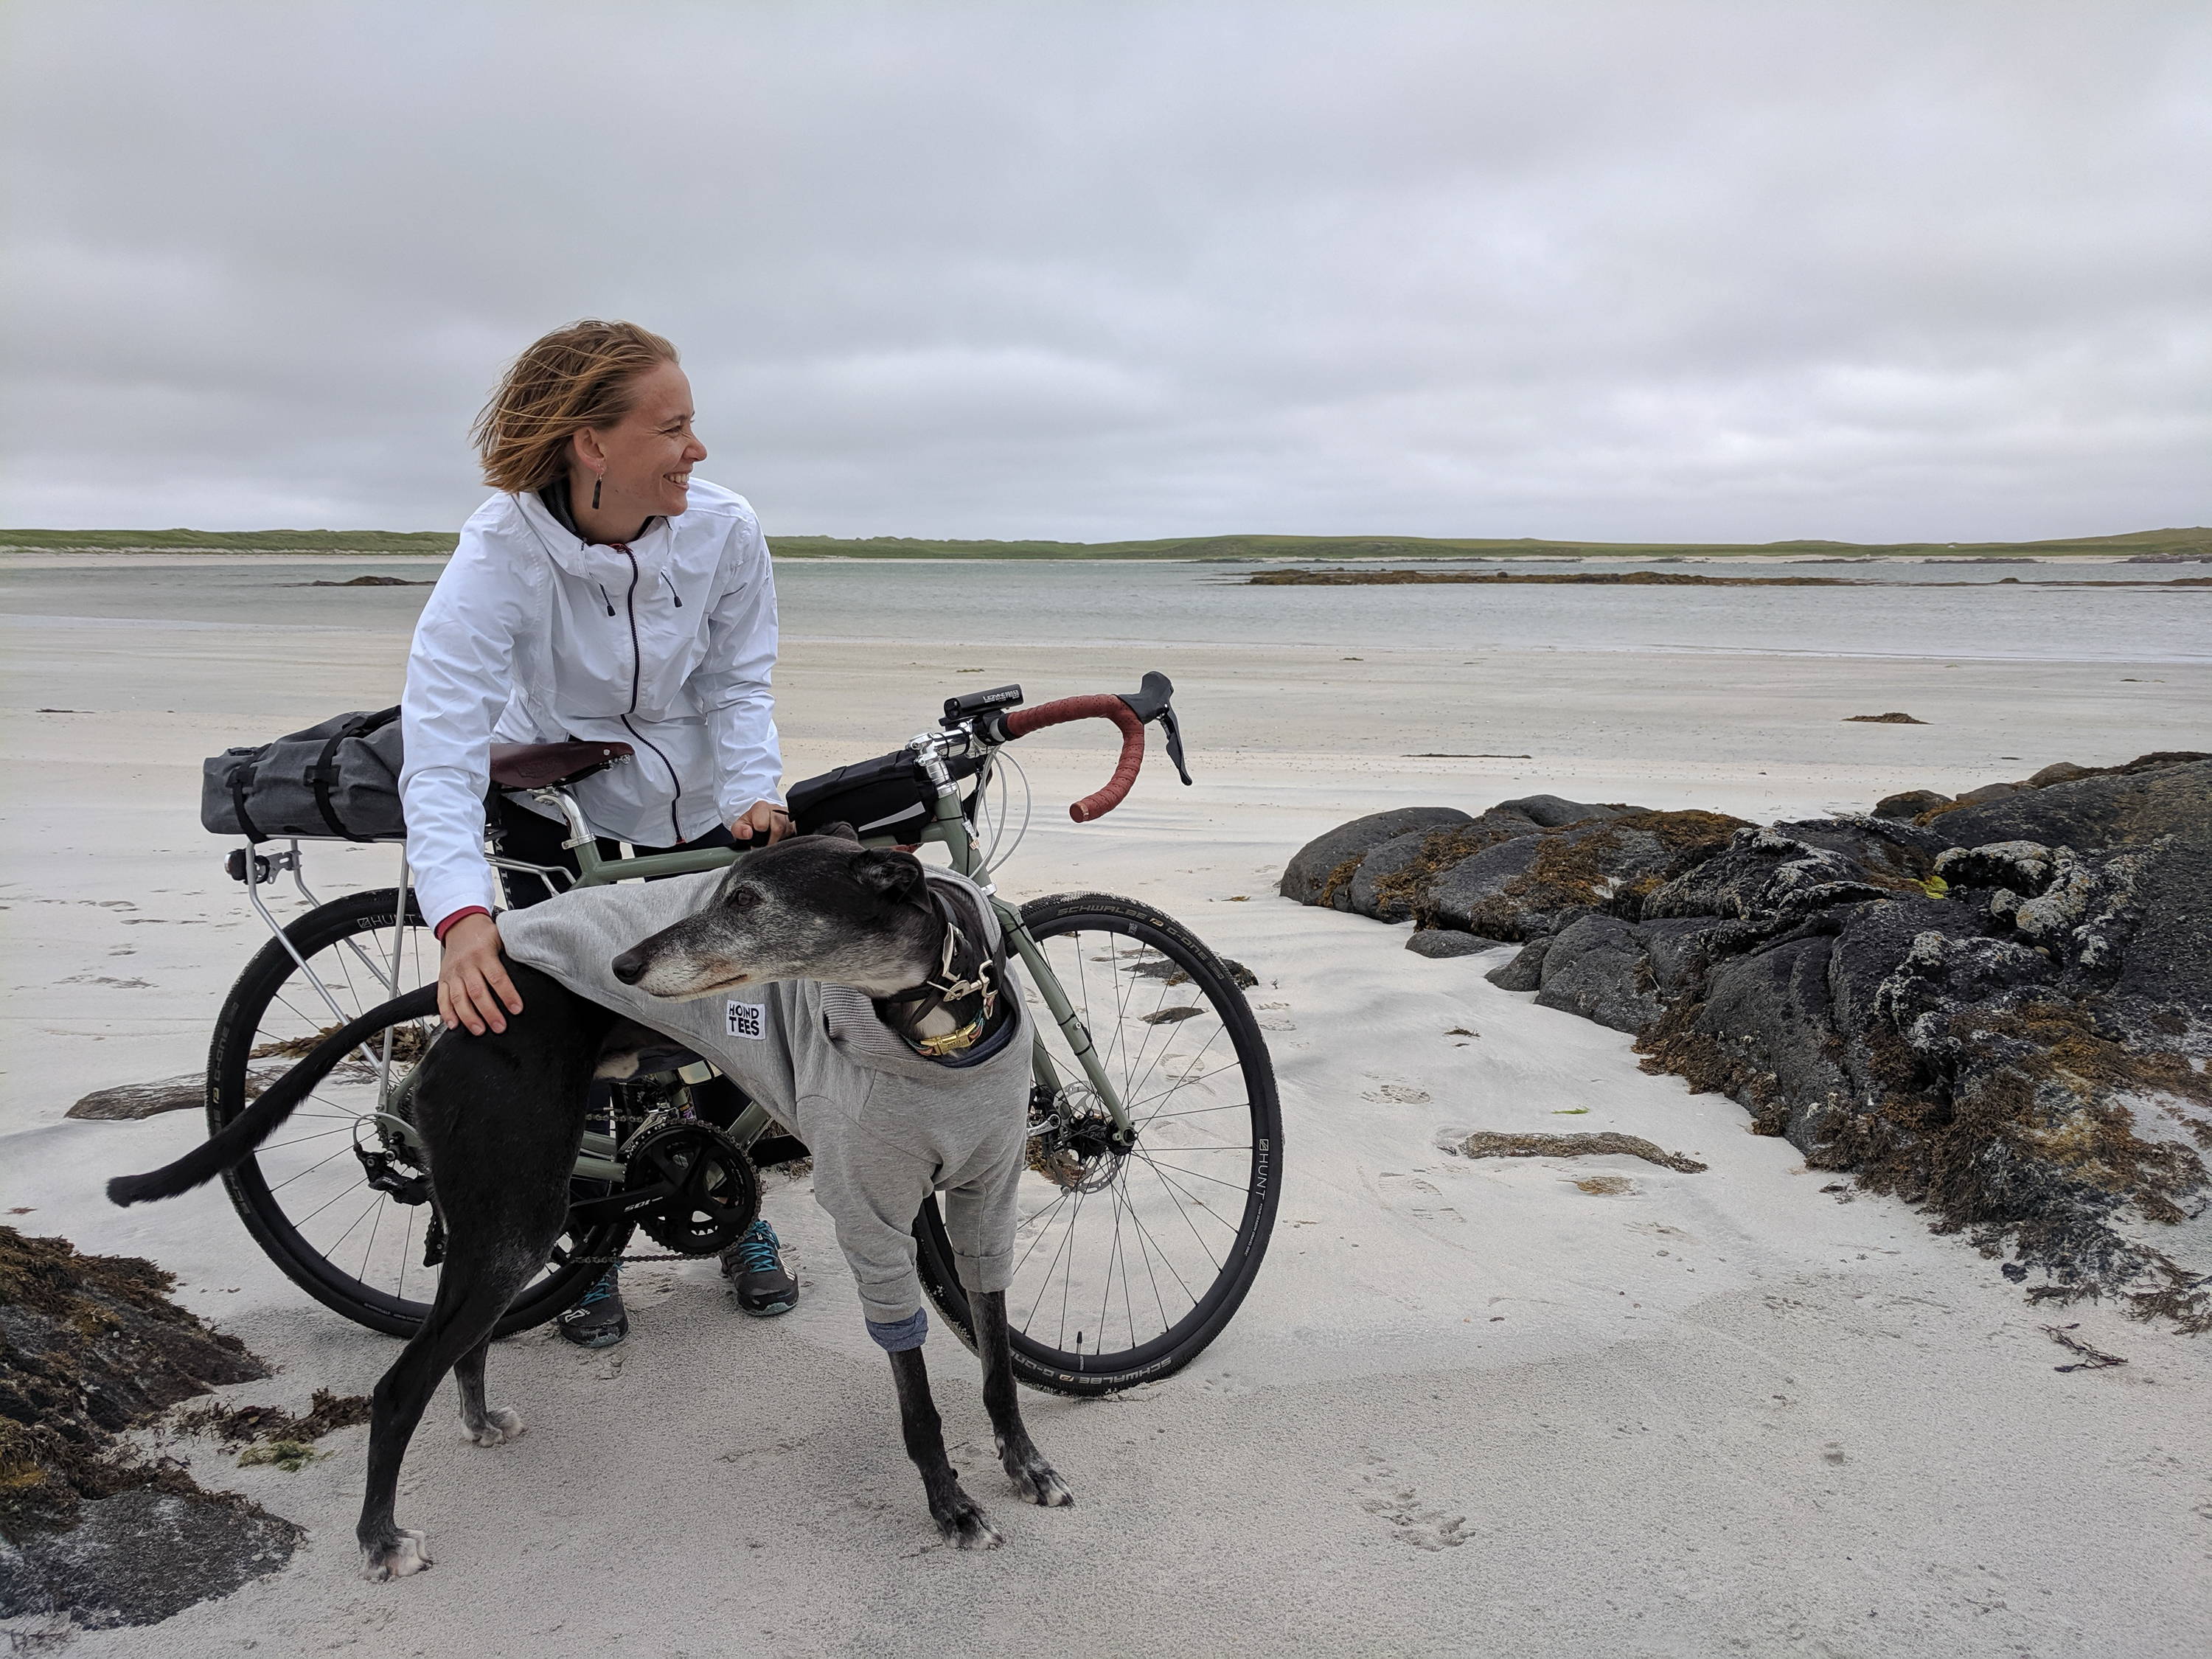 Our London Brand Manager Amy mid-way through her bike tour through the Outer Hebrides with her dog Nui and Adventure Disc 2 in Lichen Green.